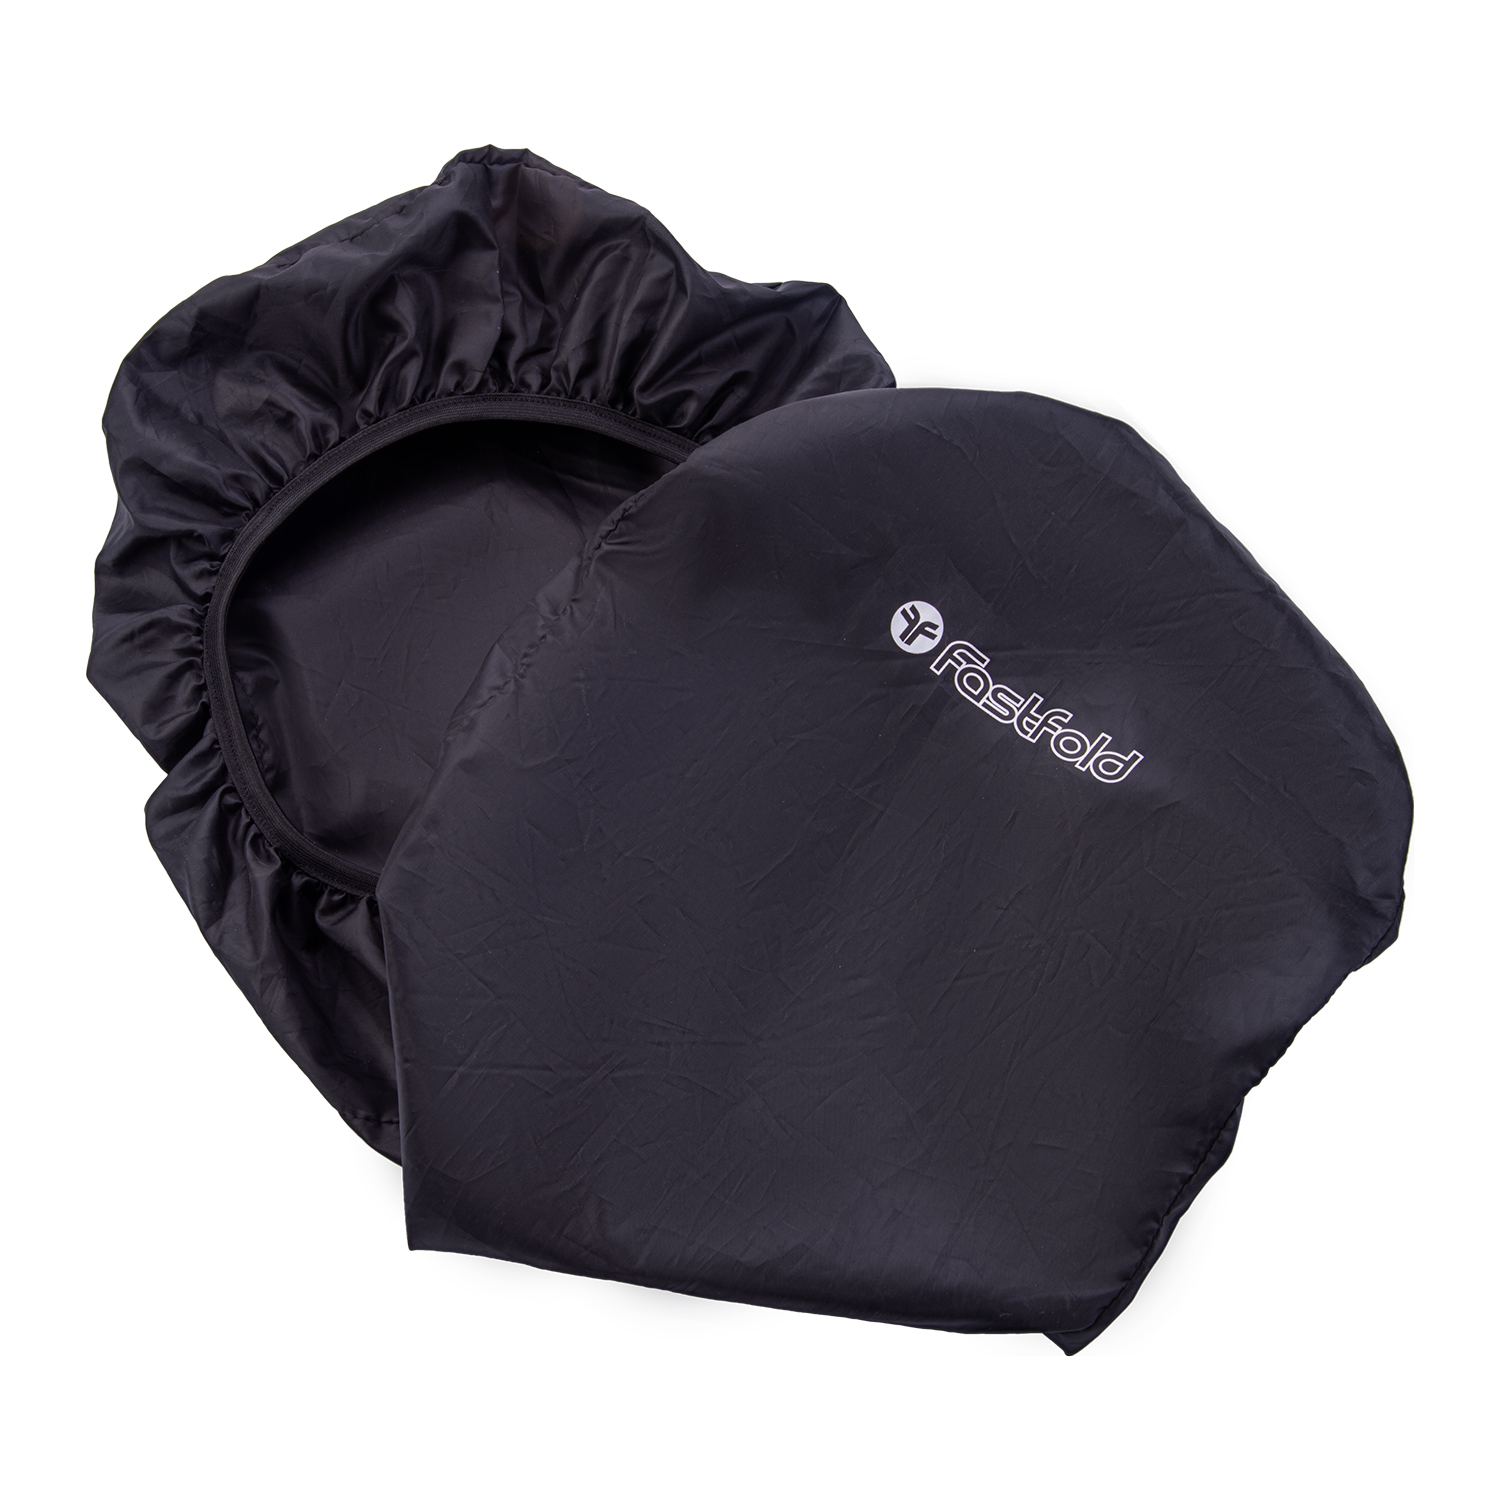 FastFold Wheelcover Black